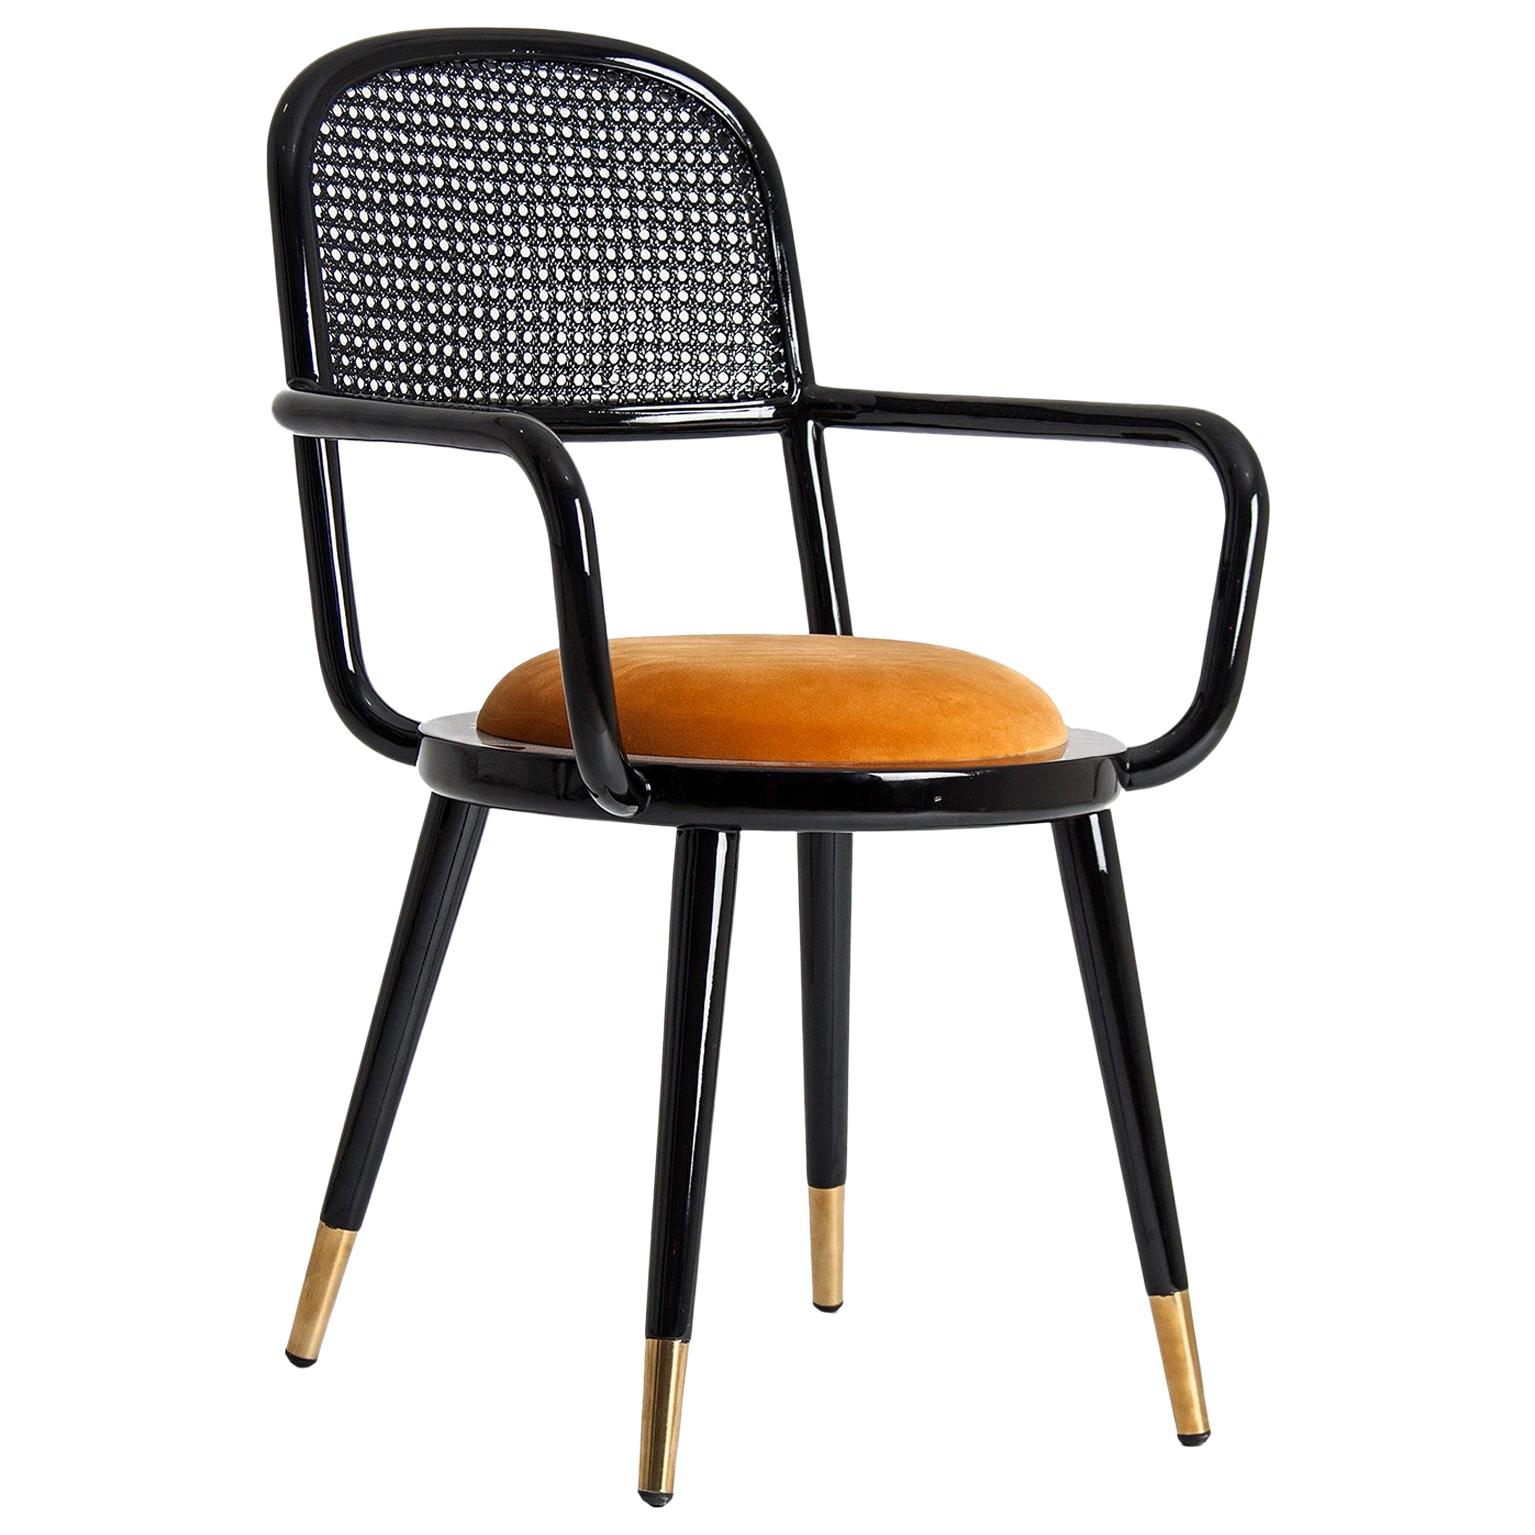 Black Lacquer Wooden and Woven Cane Chair